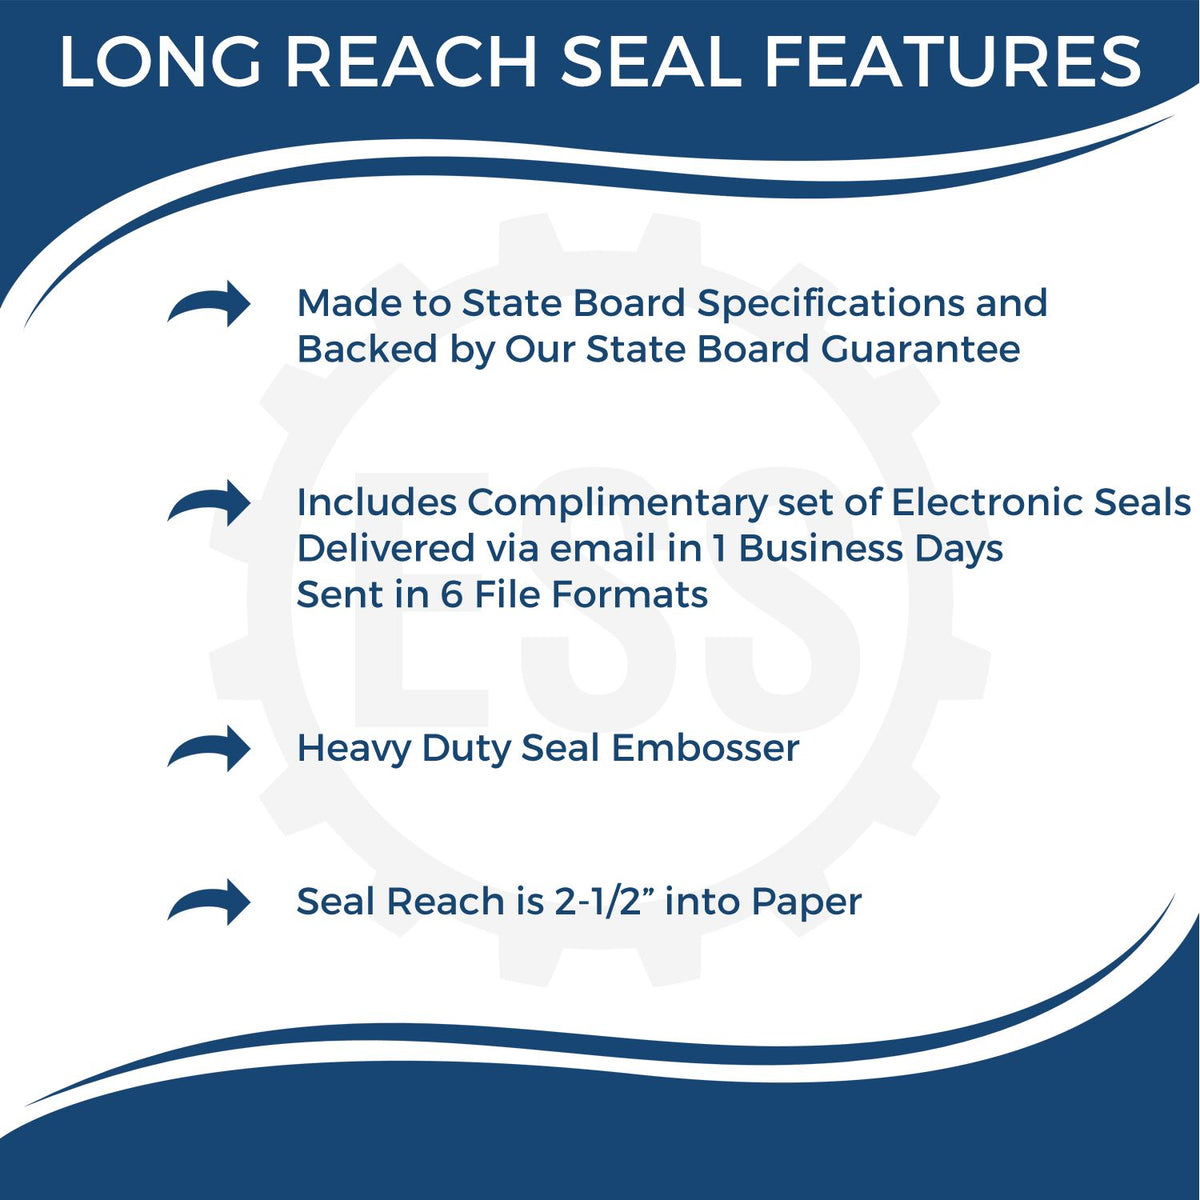 A picture of an infographic highlighting the selling points for the Long Reach New Jersey Geology Seal